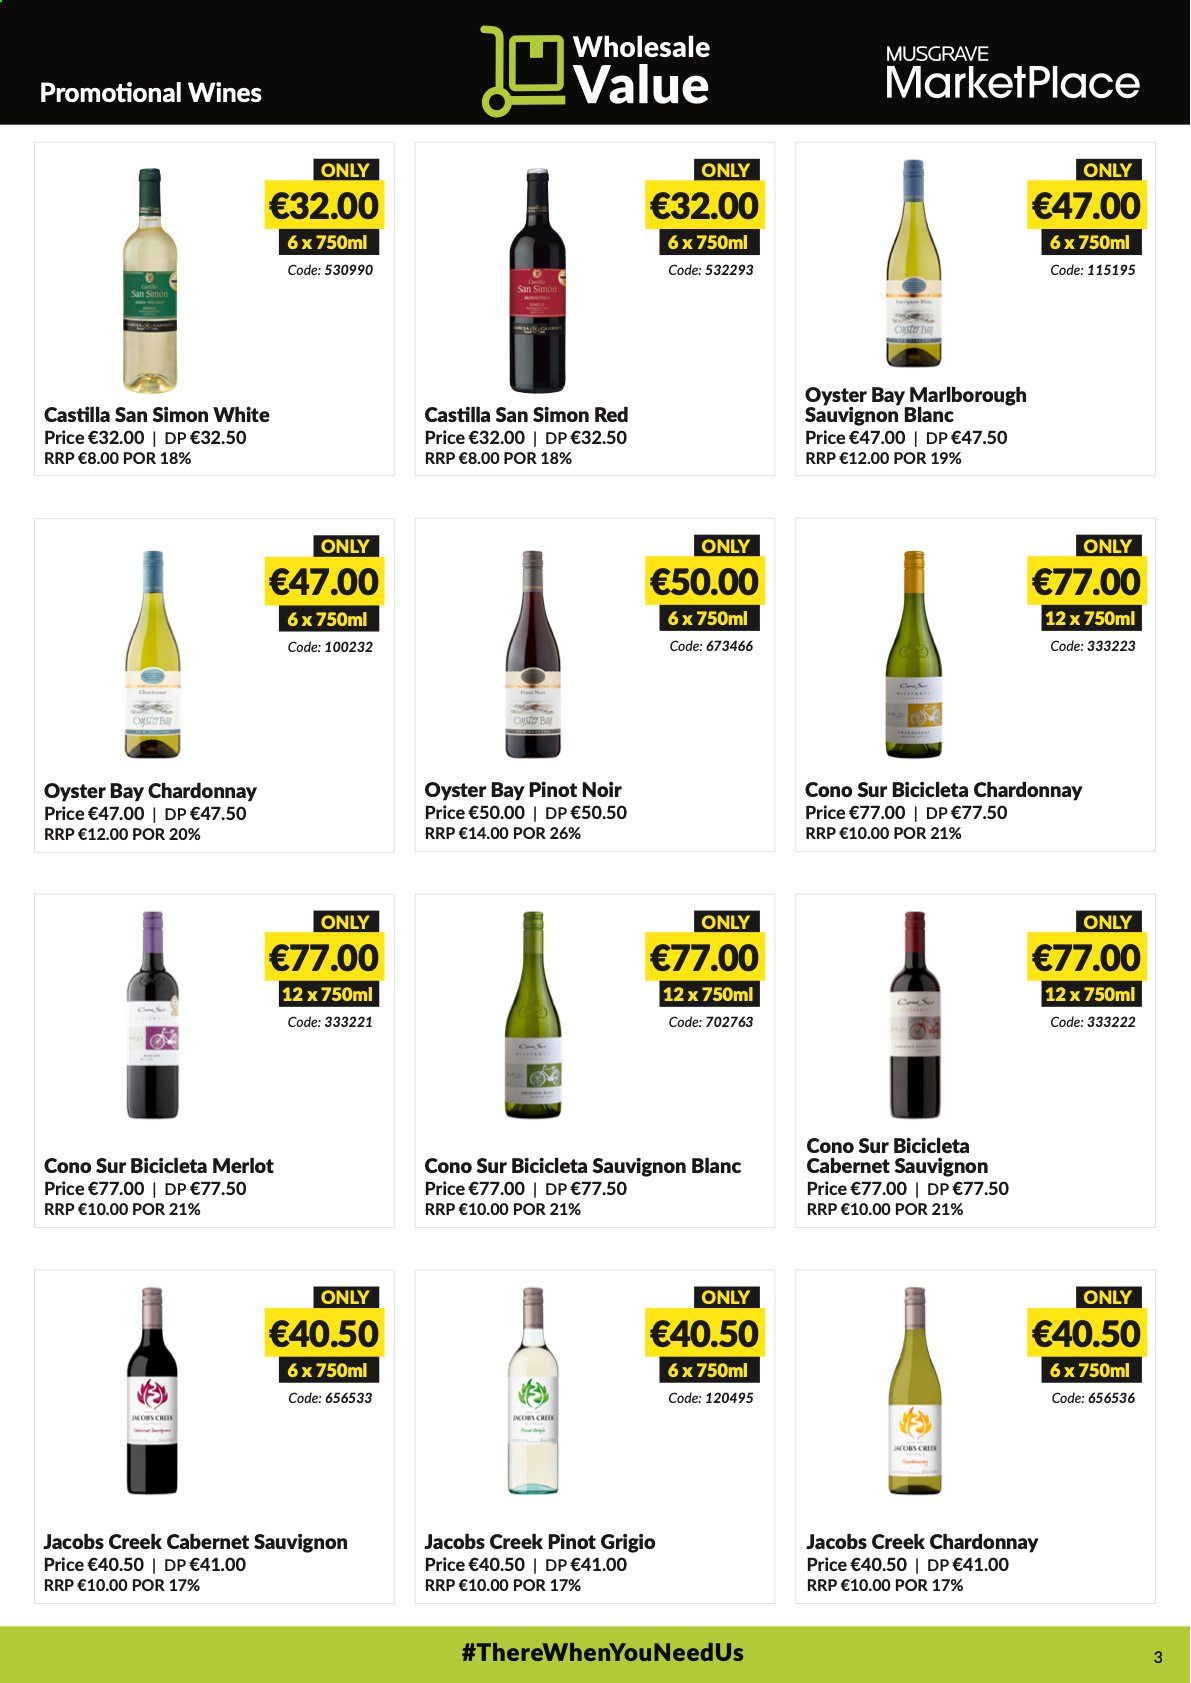 thumbnail - MUSGRAVE Market Place offer  - 09.05.2021 - 05.06.2021 - Sales products - oysters, Jacobs, Cabernet Sauvignon, red wine, white wine, Chardonnay, wine, Merlot, Pinot Noir, Pinot Grigio, Sauvignon Blanc. Page 3.